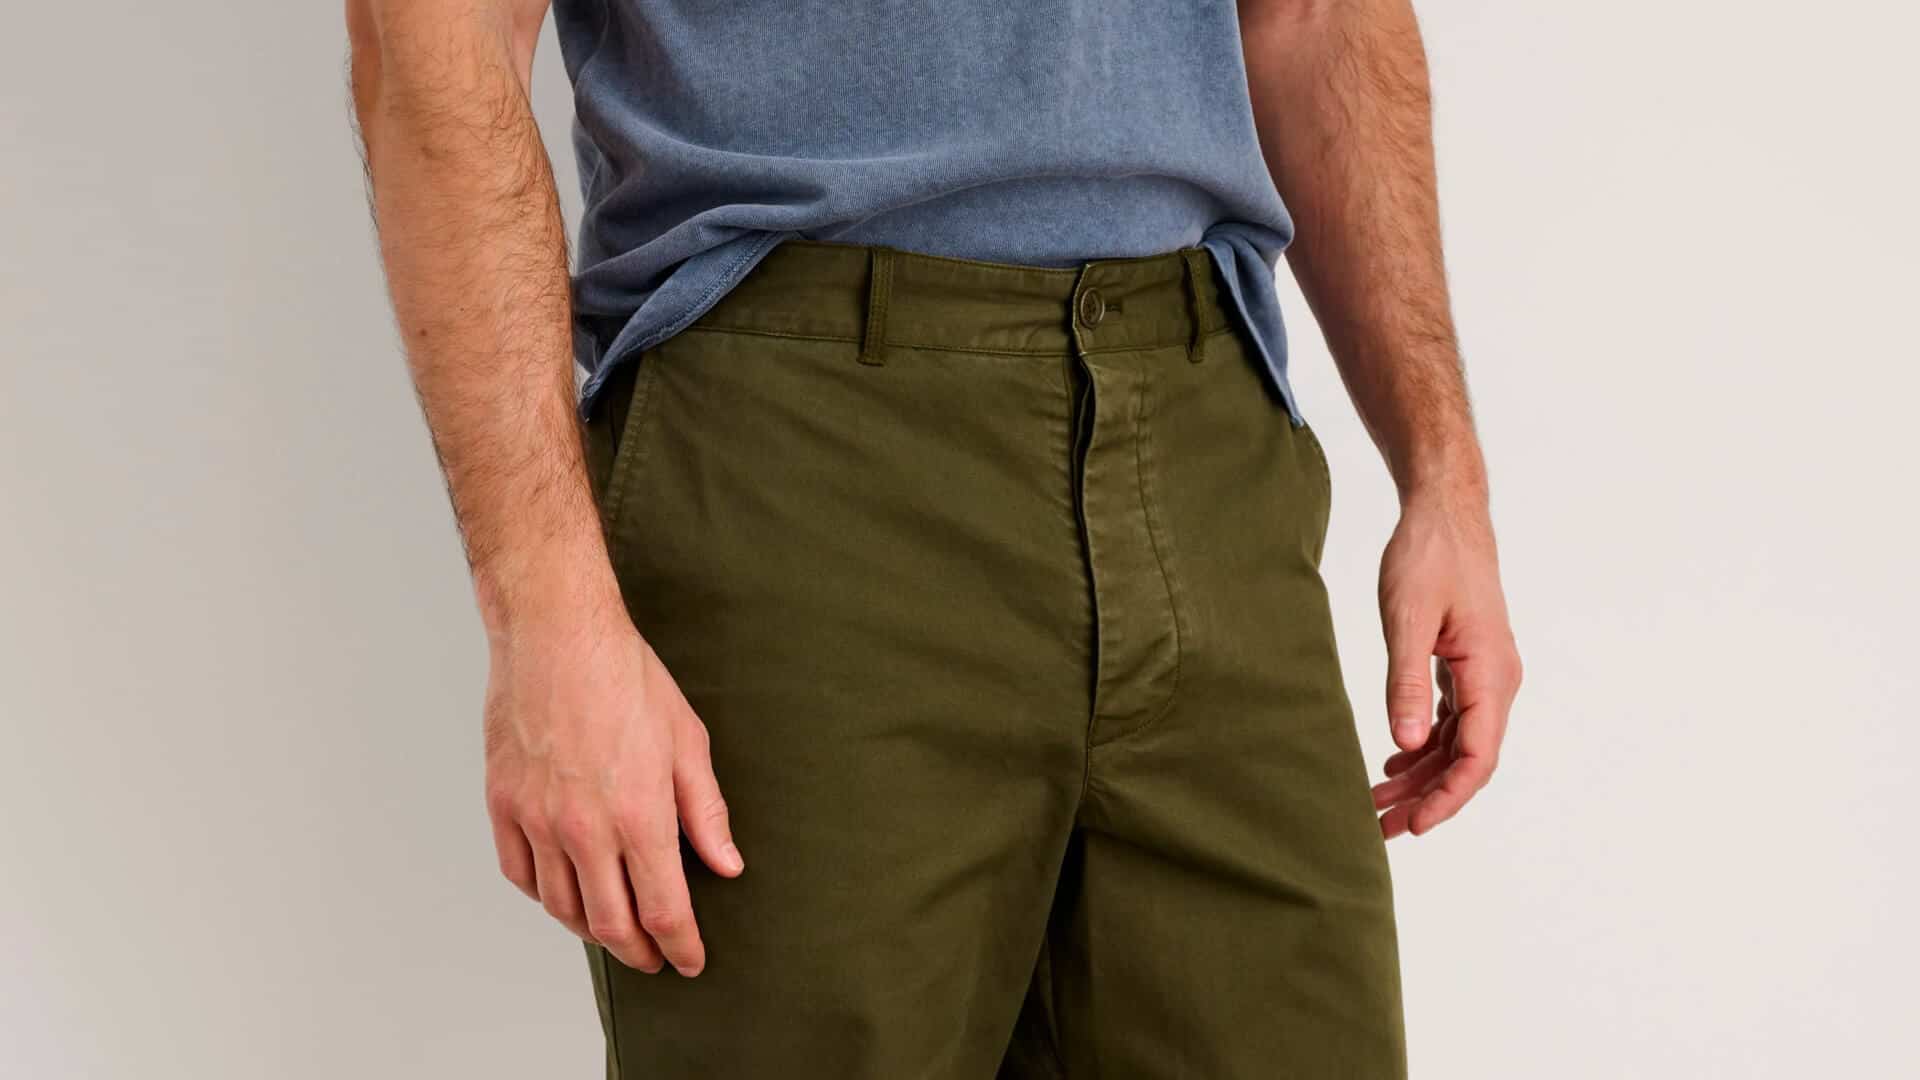 Men’s Green Pants Outfit Inspiration: 14 Modern Looks For 2022